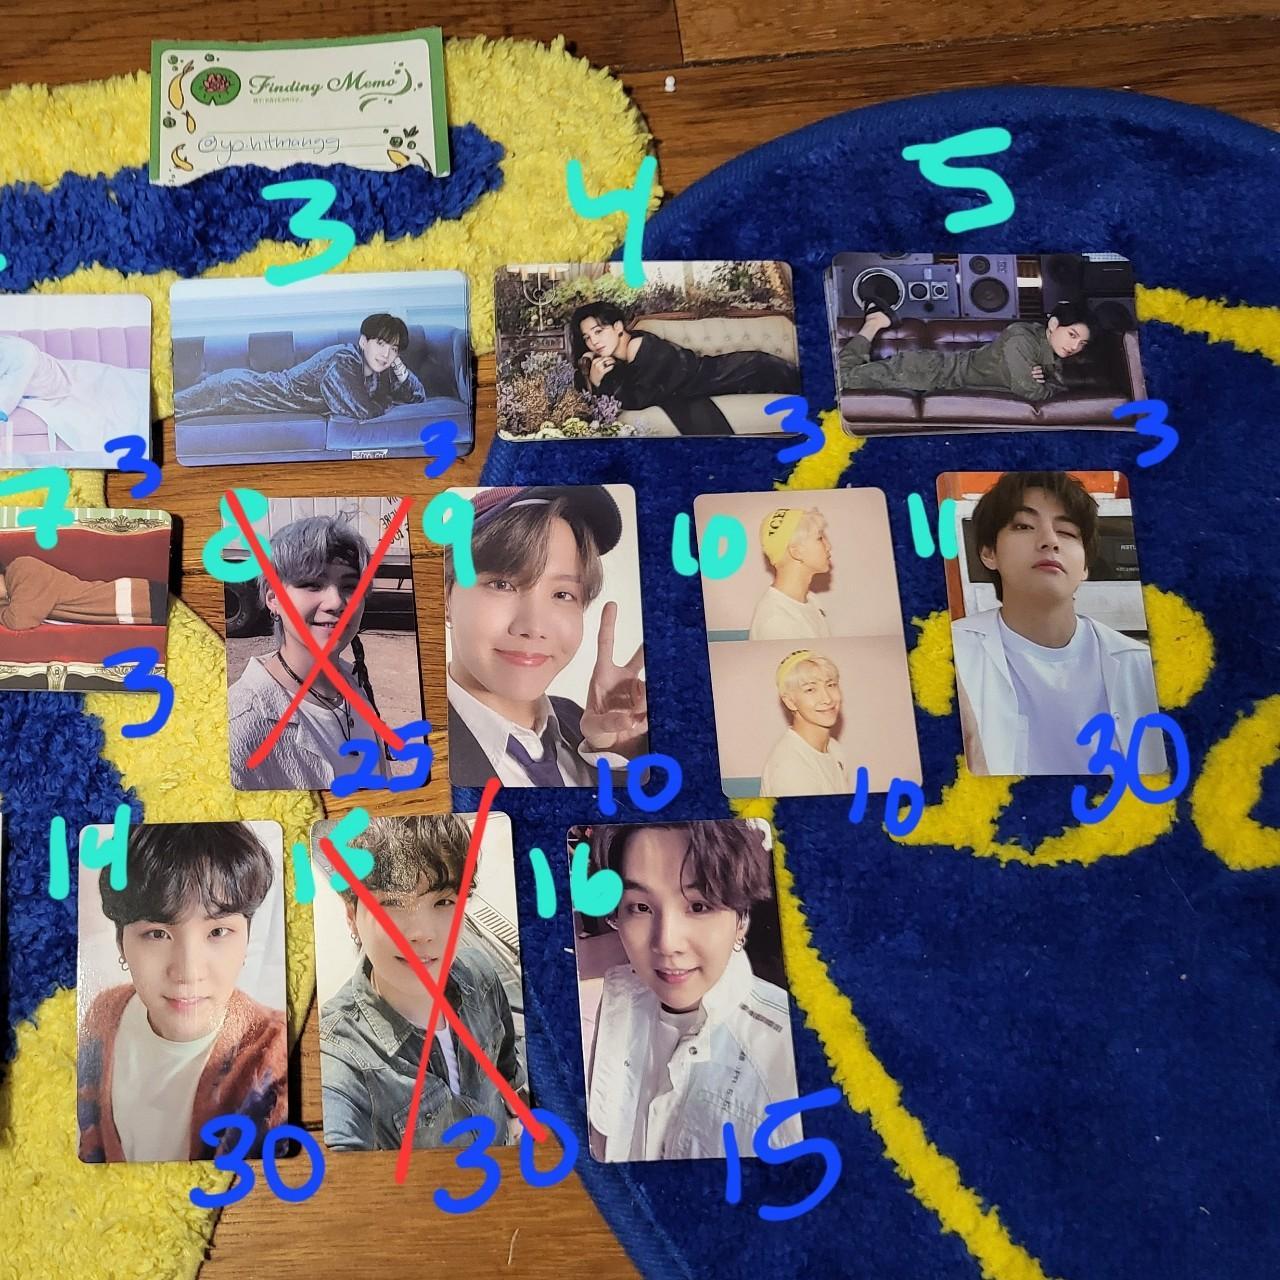 WTS official bts photocards !! these pcs are from - Depop